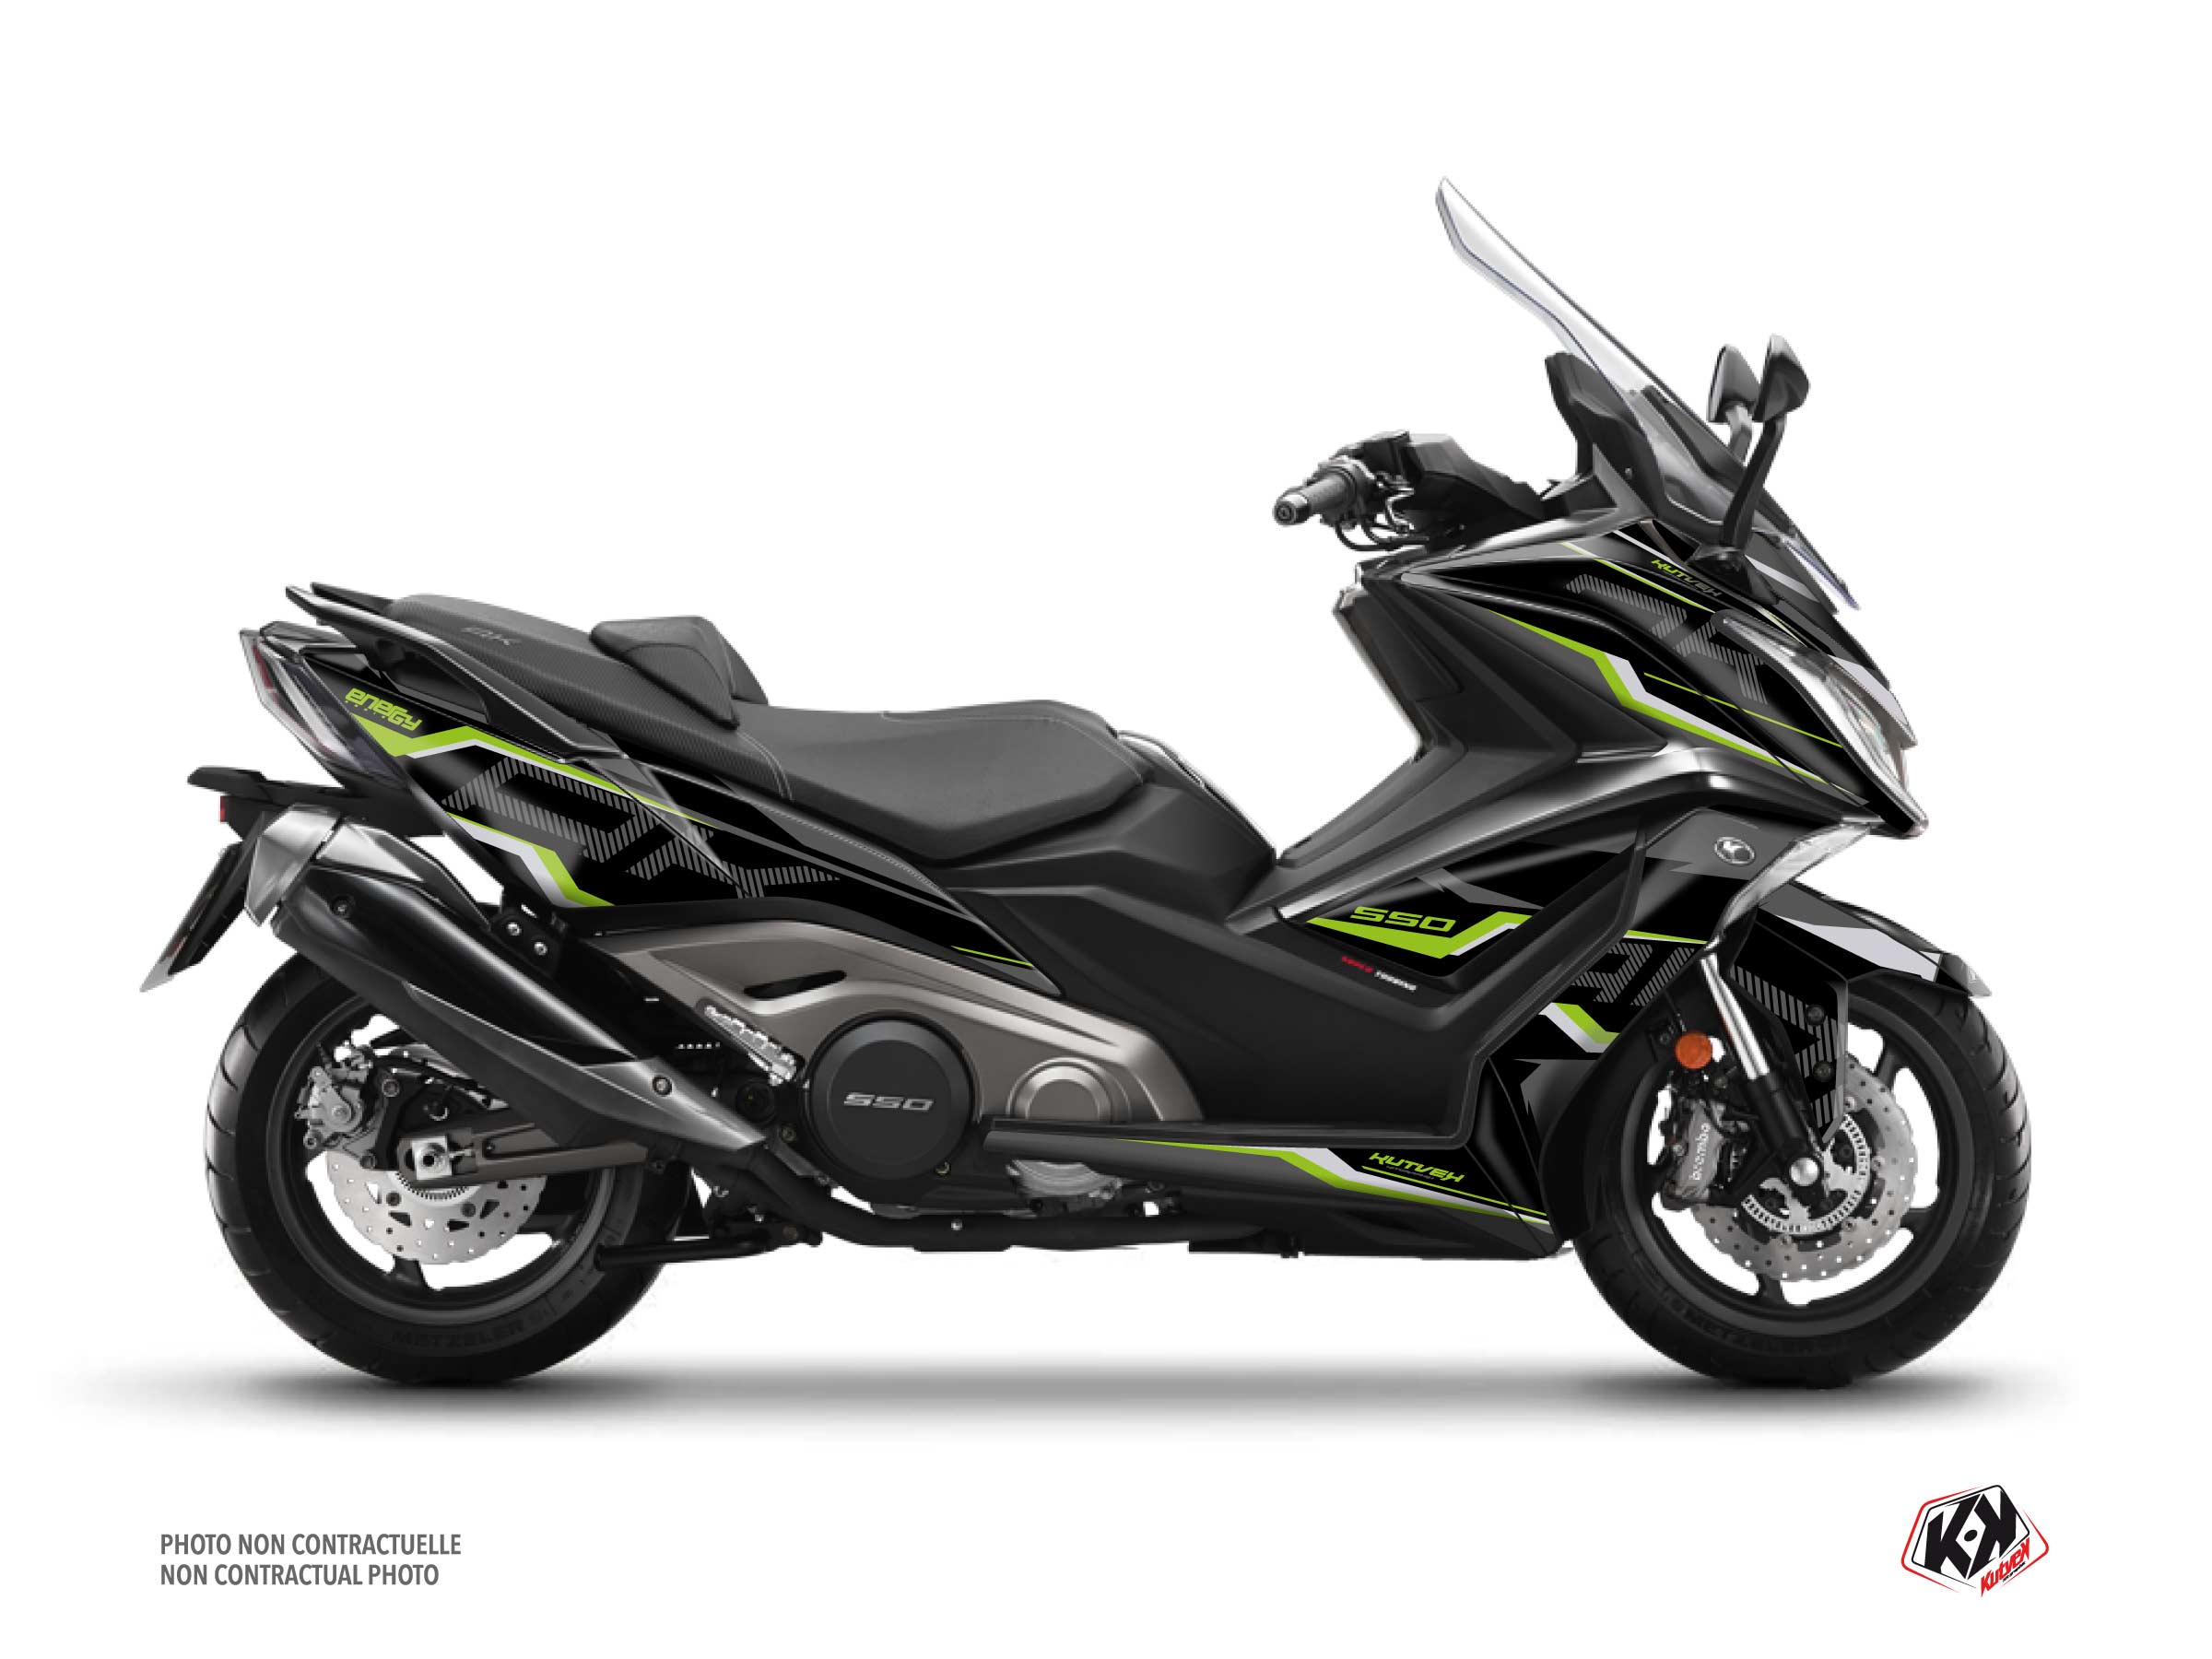 Kymco AK 550 Maxiscooter Energy Graphic Kit Black Green 